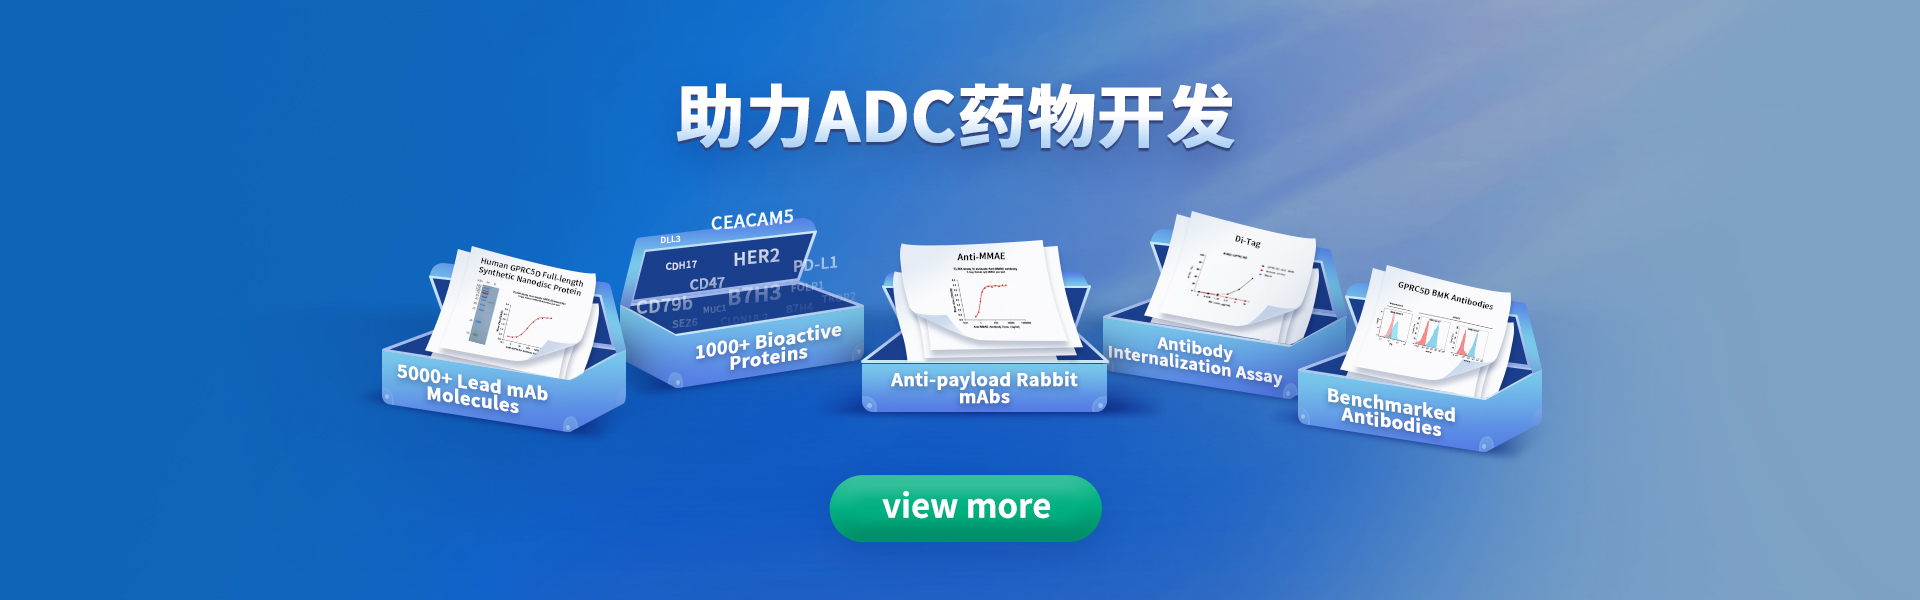 mainpage-ADC banner 副本